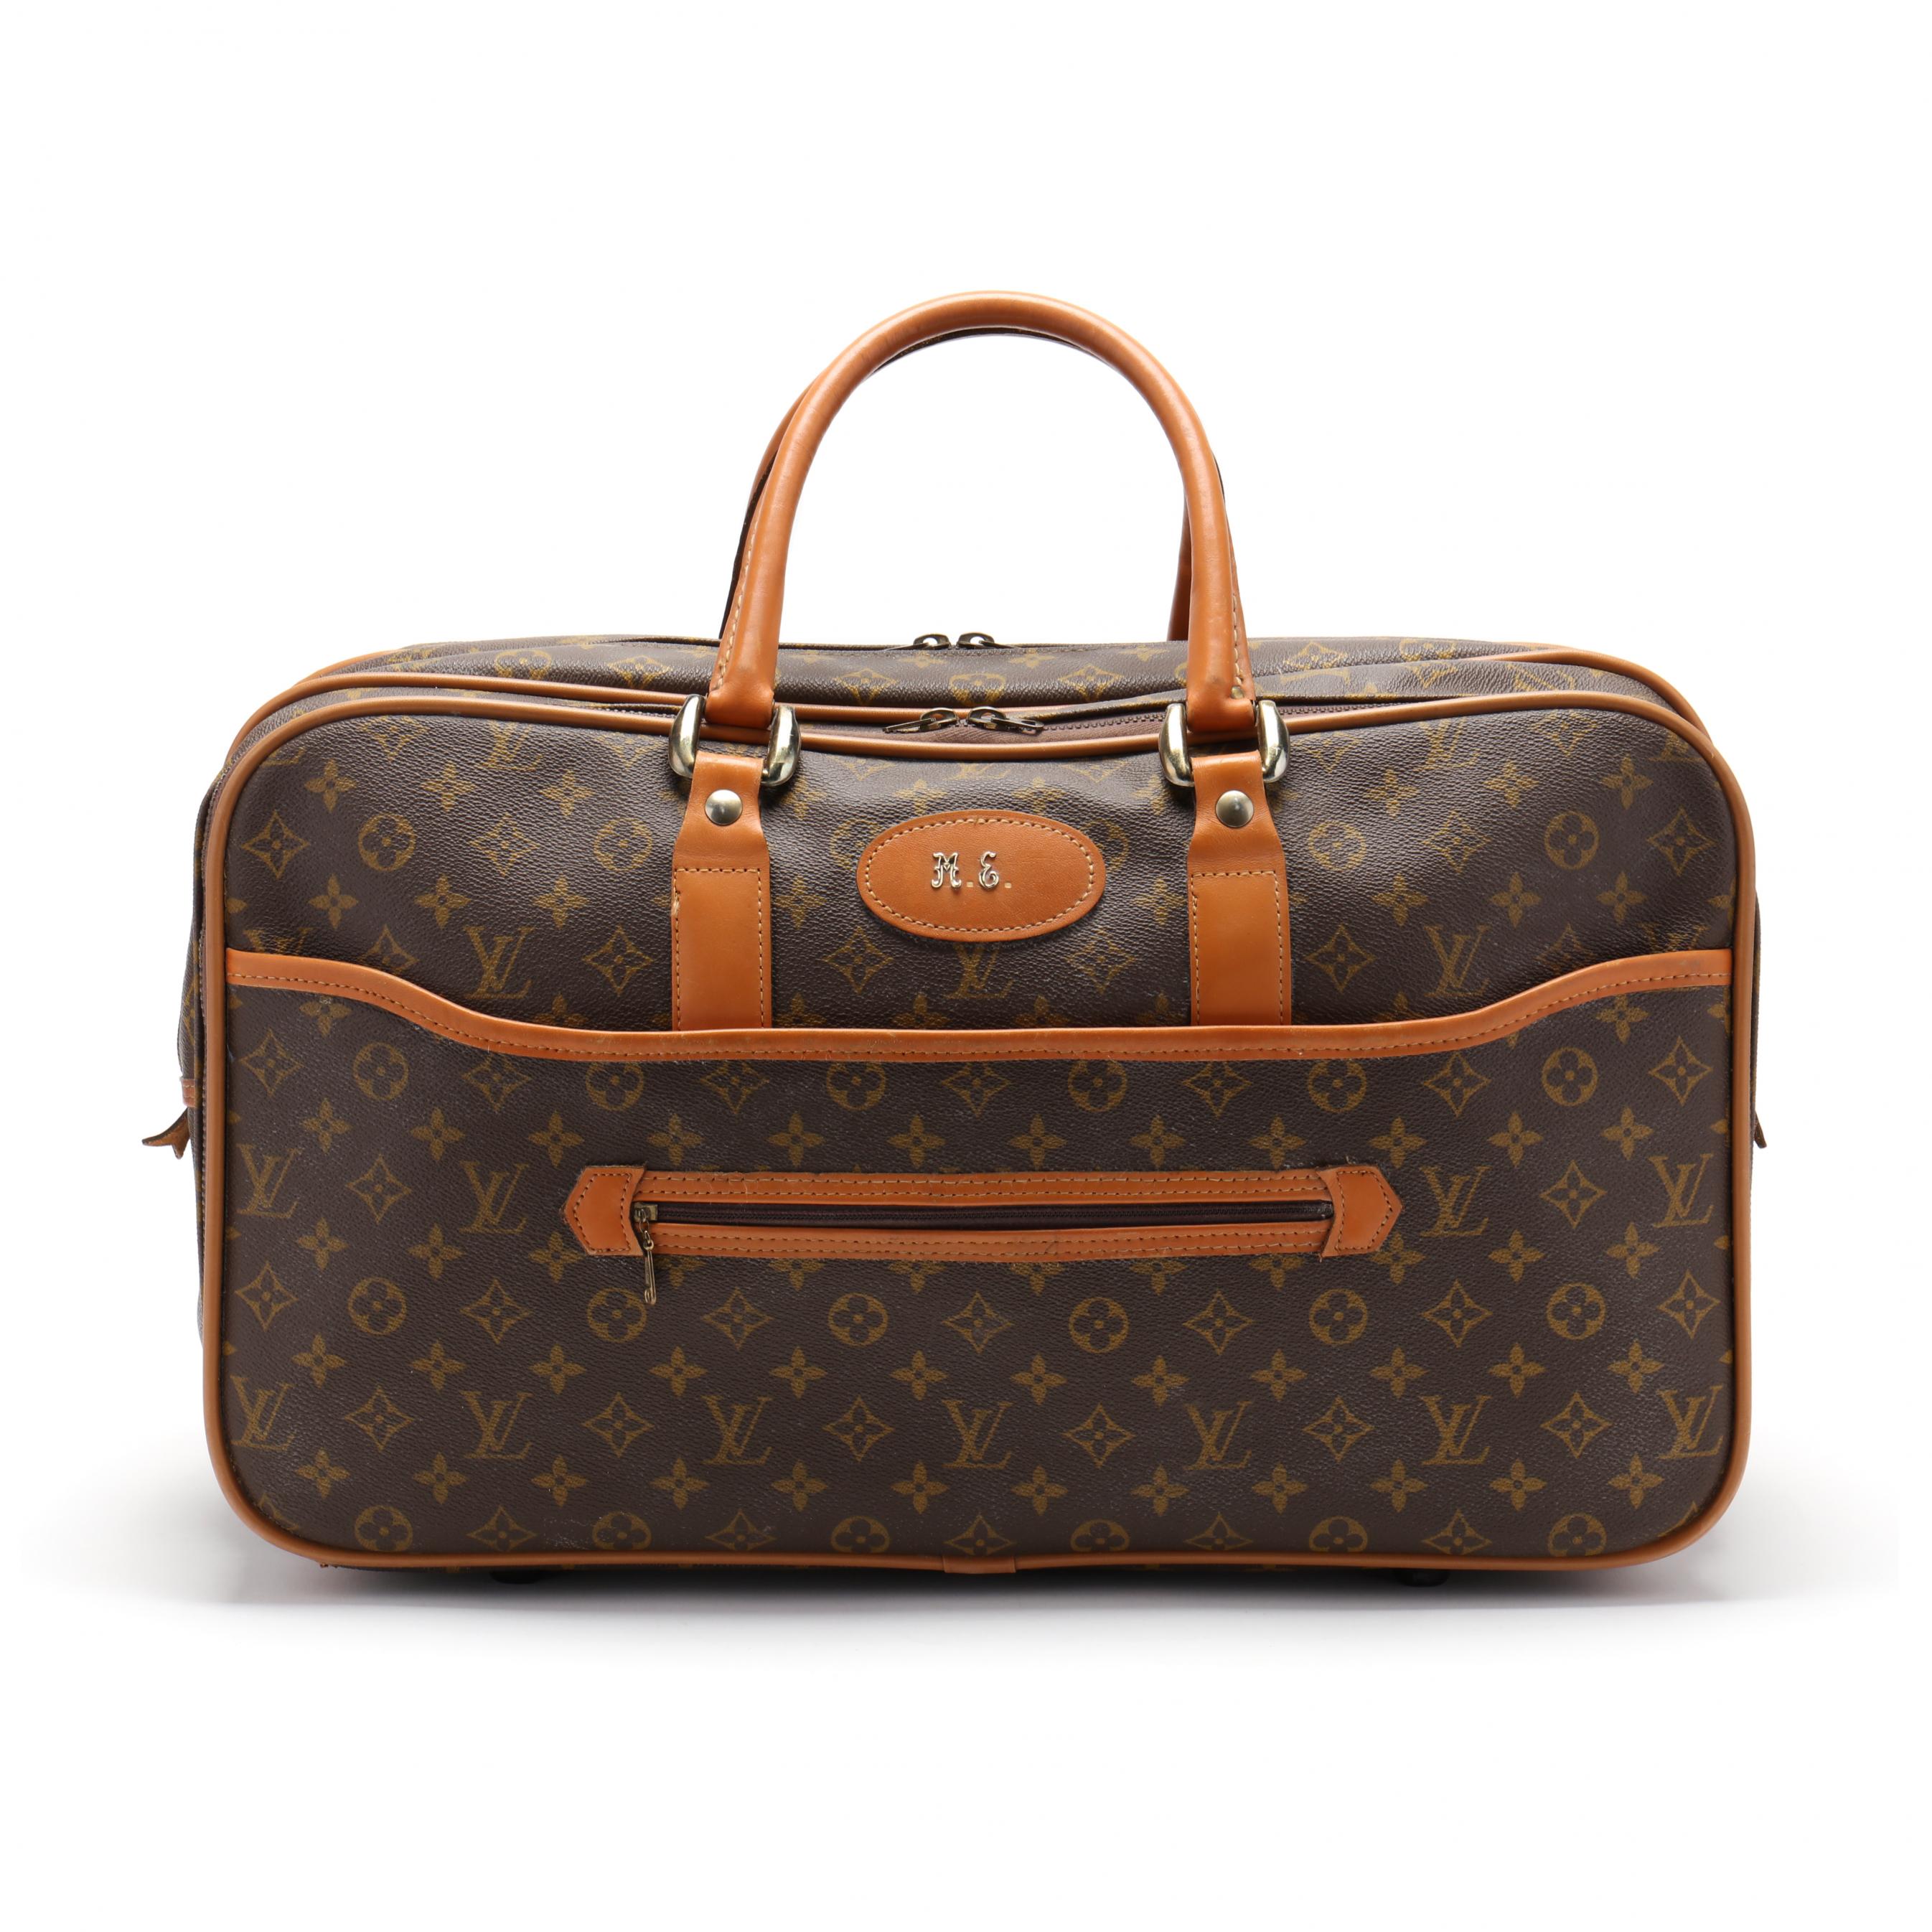 Louis Vuitton Charity Auction: The Ultimate Travel Bag